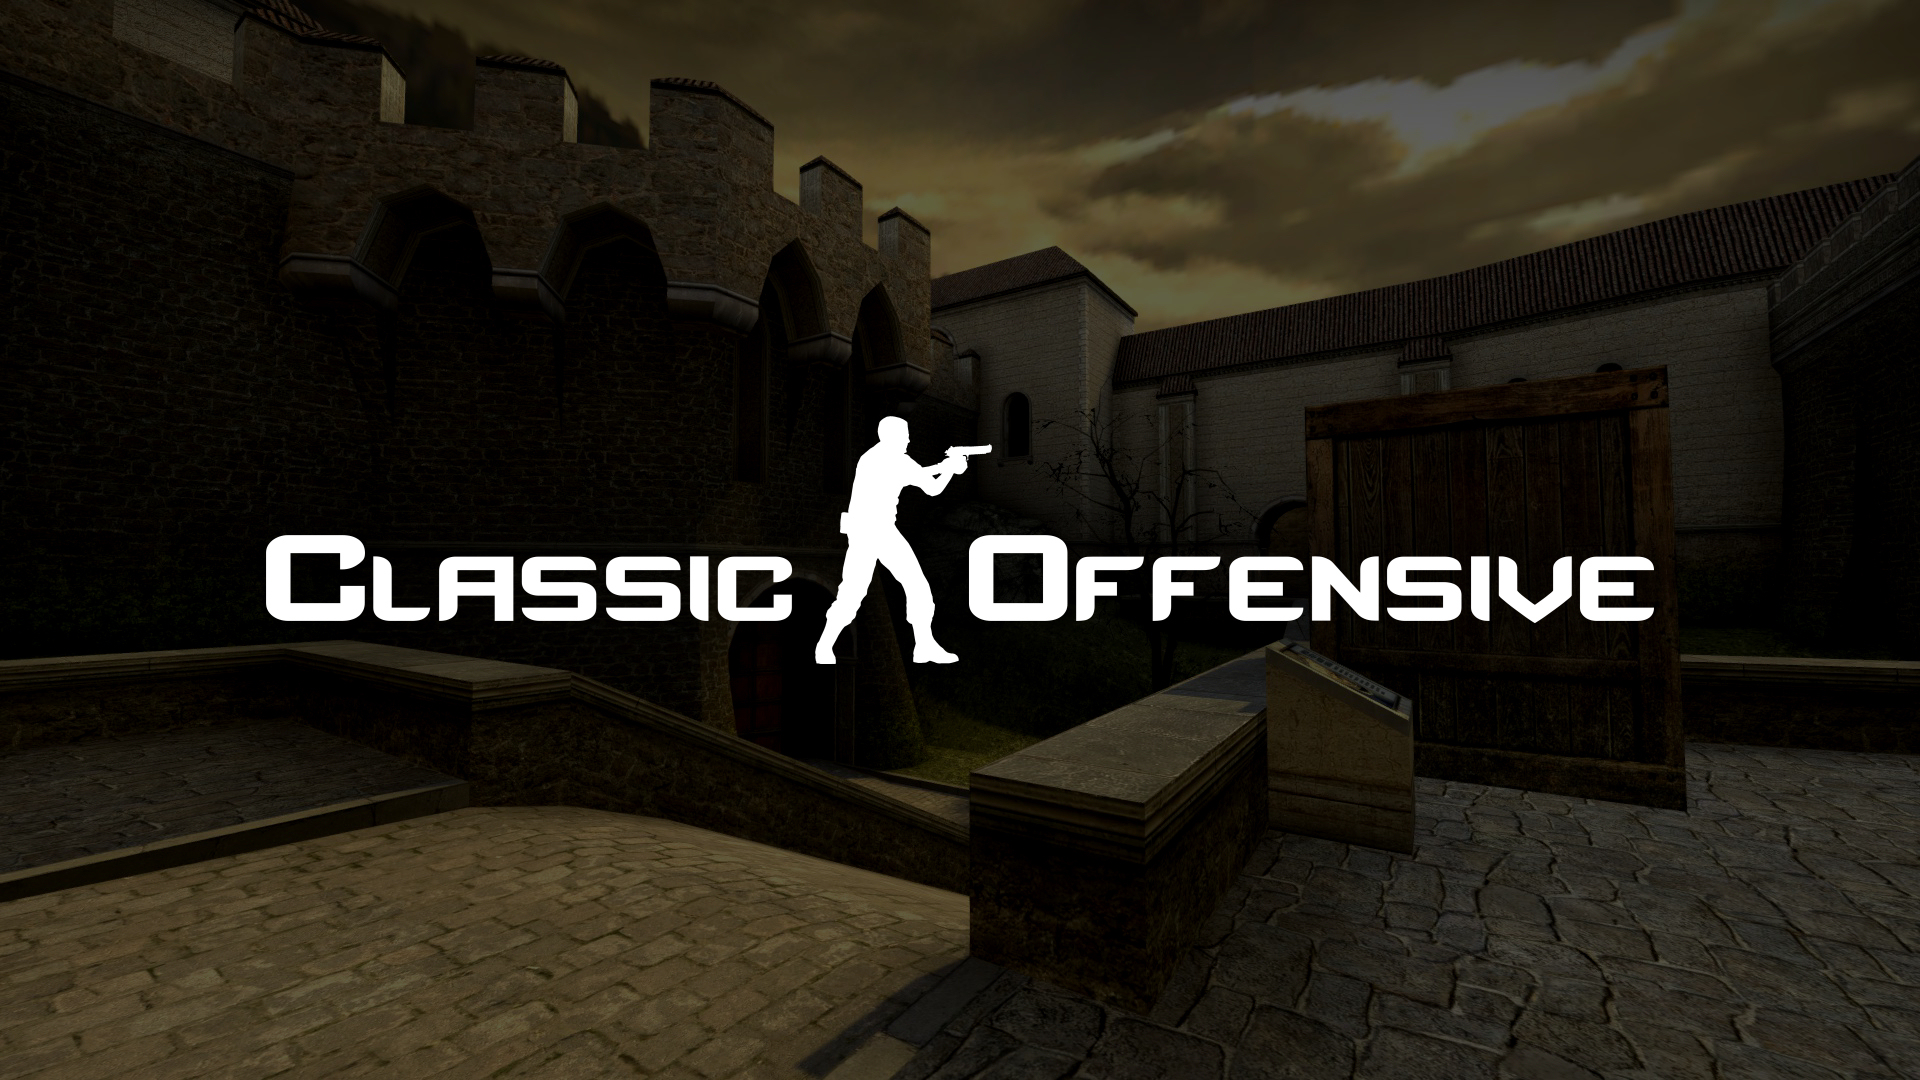 Csgo classic offensive download